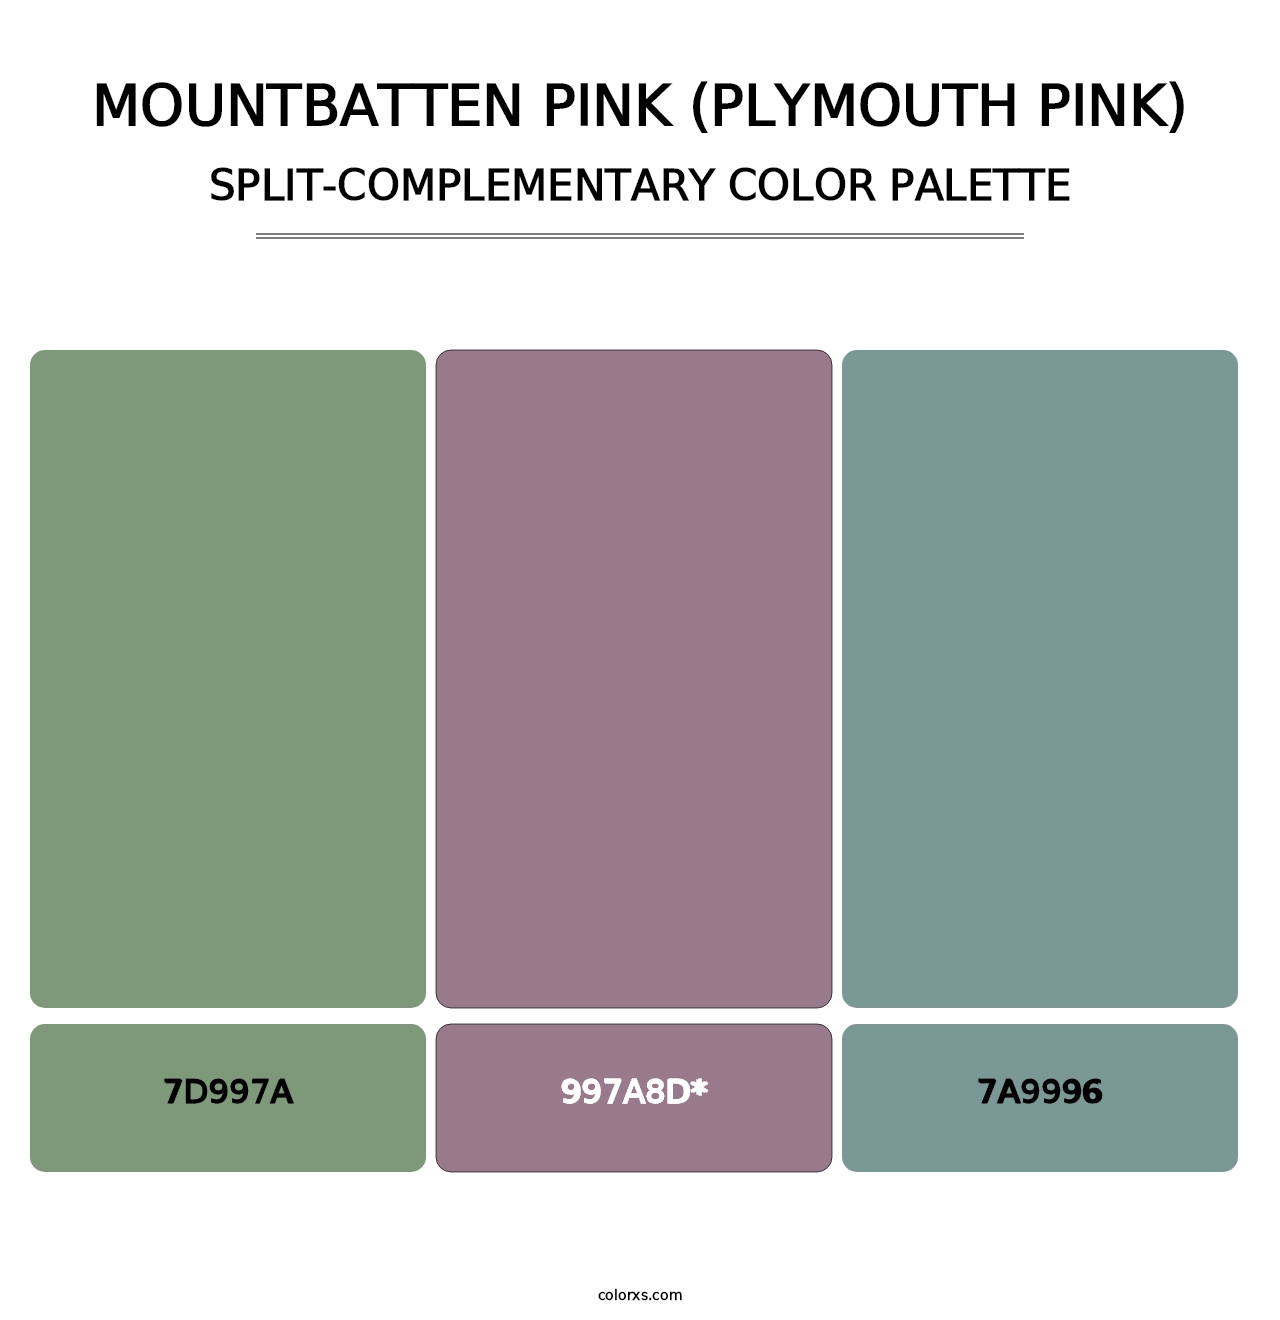 Mountbatten Pink (Plymouth Pink) - Split-Complementary Color Palette